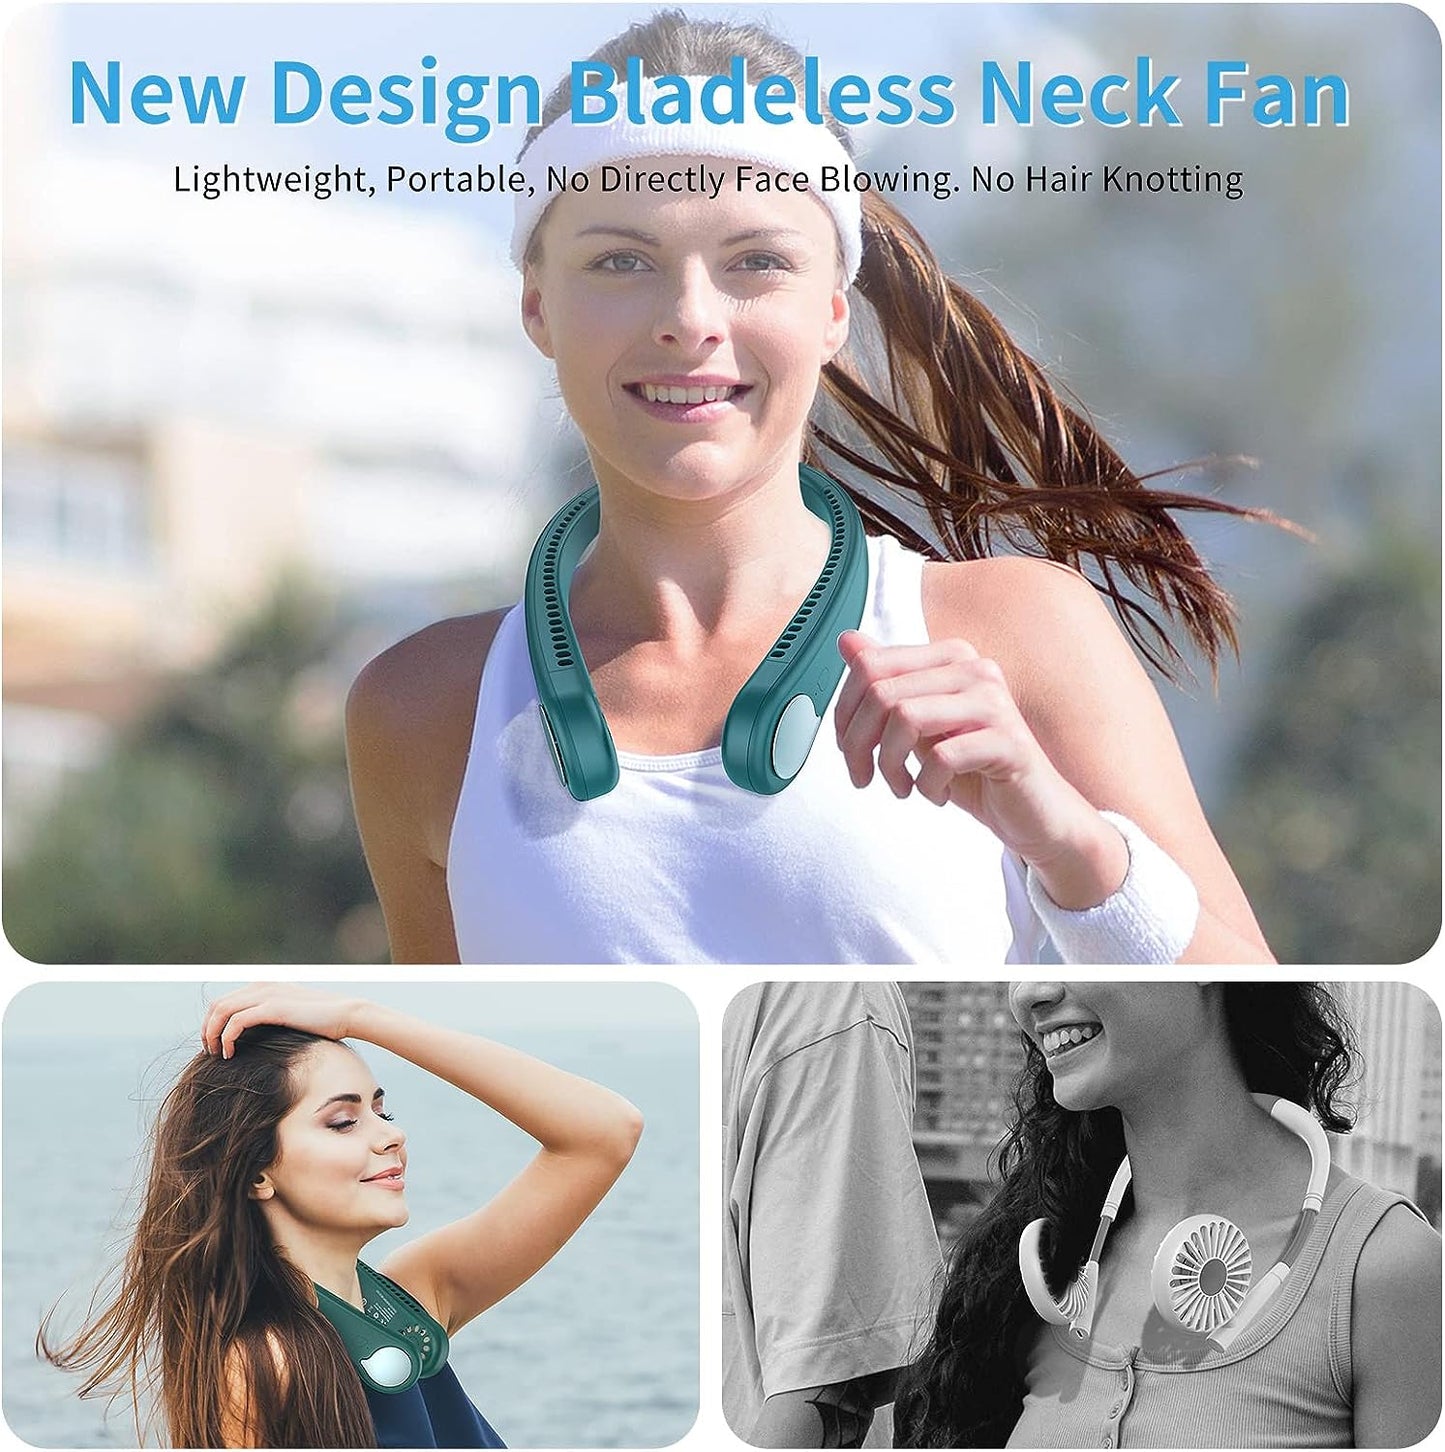 SmartDevil Personal Neck Fan, Hands Free Bladeless Neck Fan, Rechargeable Battery Operated Wearable Portable Fan, 360° Cooling Hanging Neck Fan, 3 Speeds, 48 Air Outlet, for Travel, Outdoor (Green)